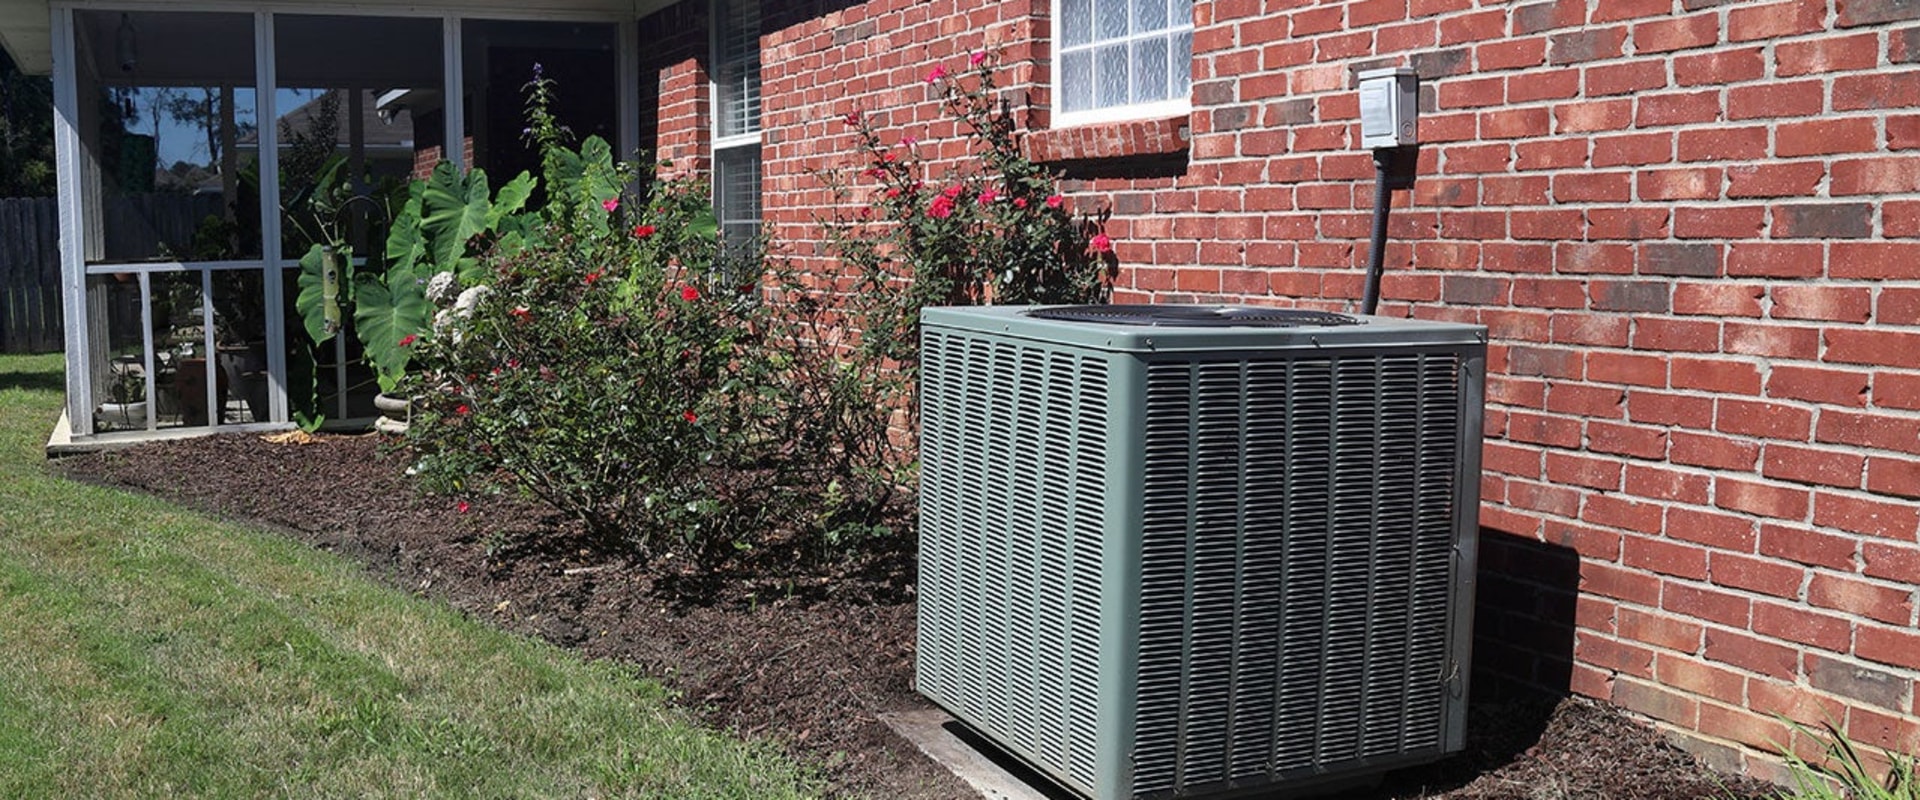 Is HVAC Replacement a Capital or Expense? - An Expert's Guide